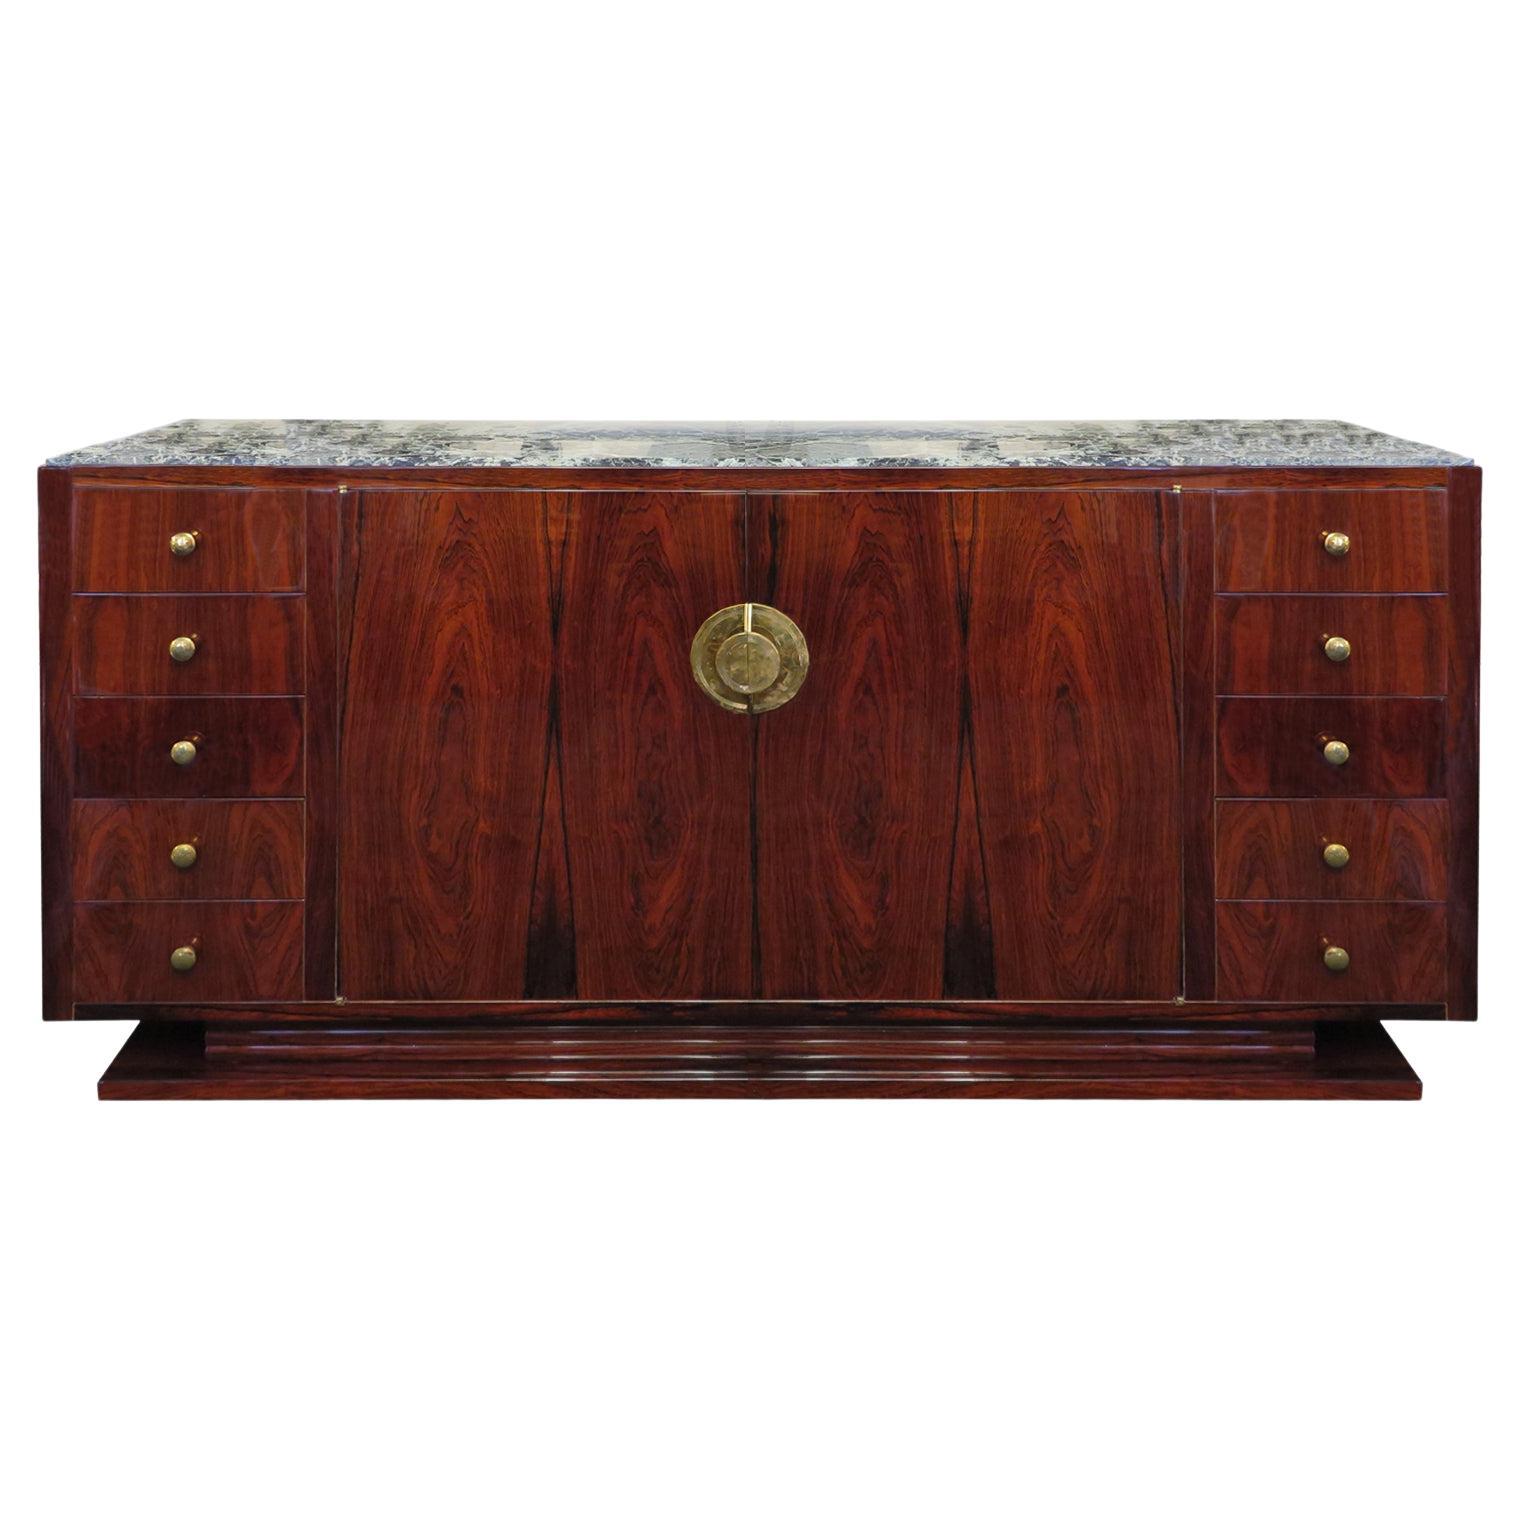 Antique French Art Deco Rosewood Sideboard with Green Marble Top For Sale